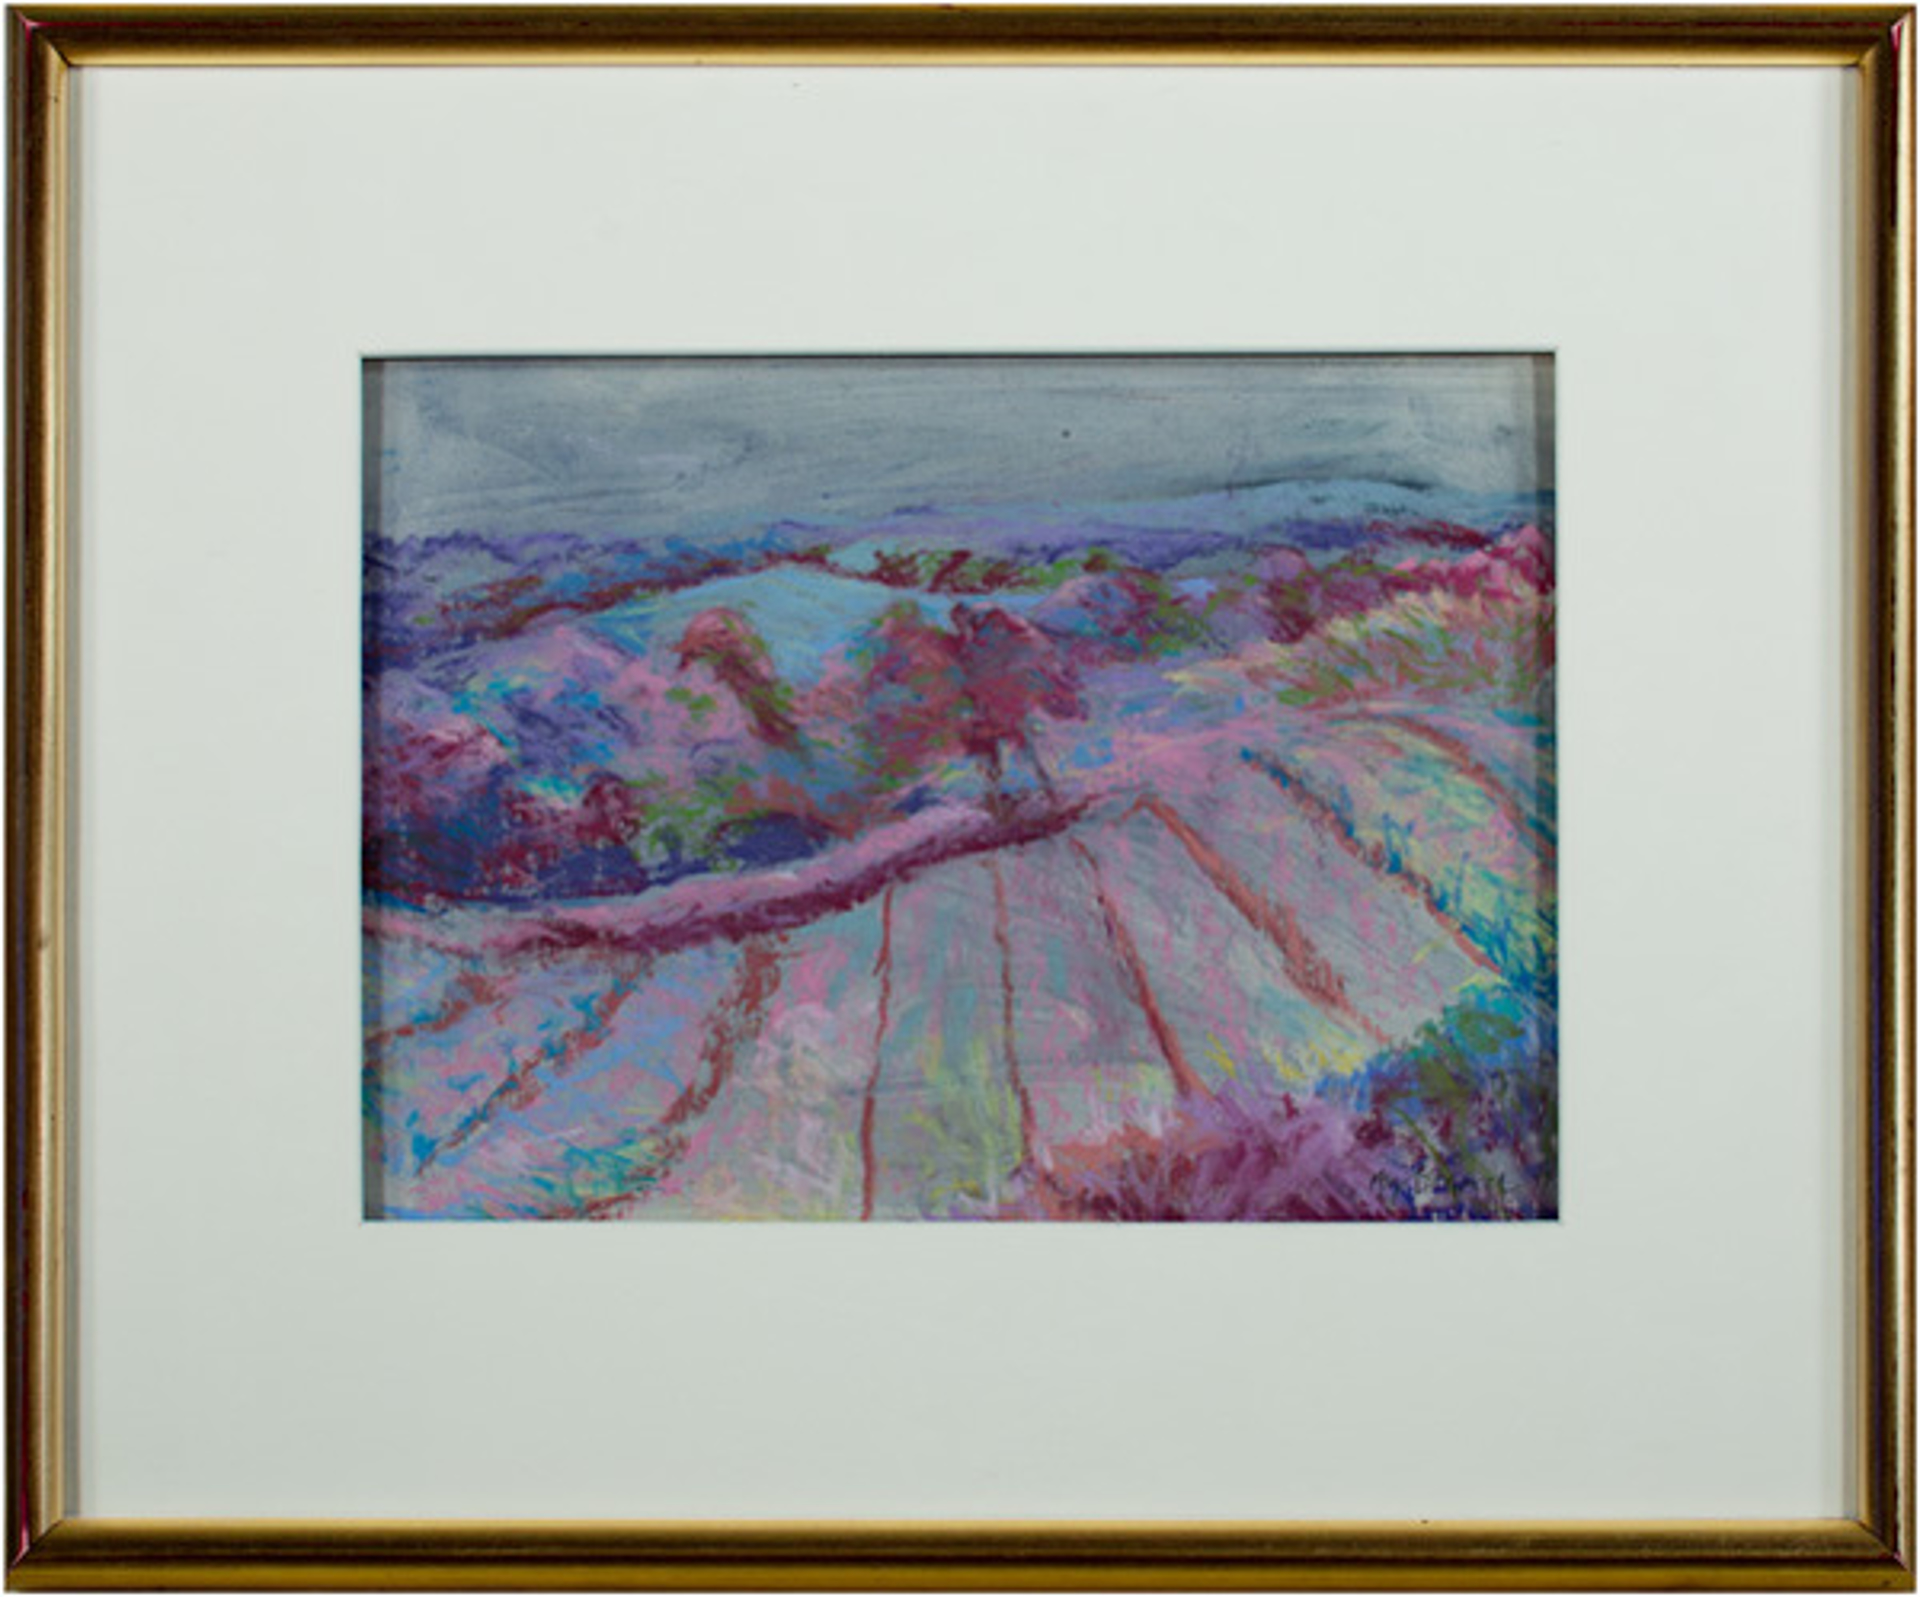 Orchard View- Small Version (Dr. Johnson's Rims Edge Orchard) by Peggy Leonard